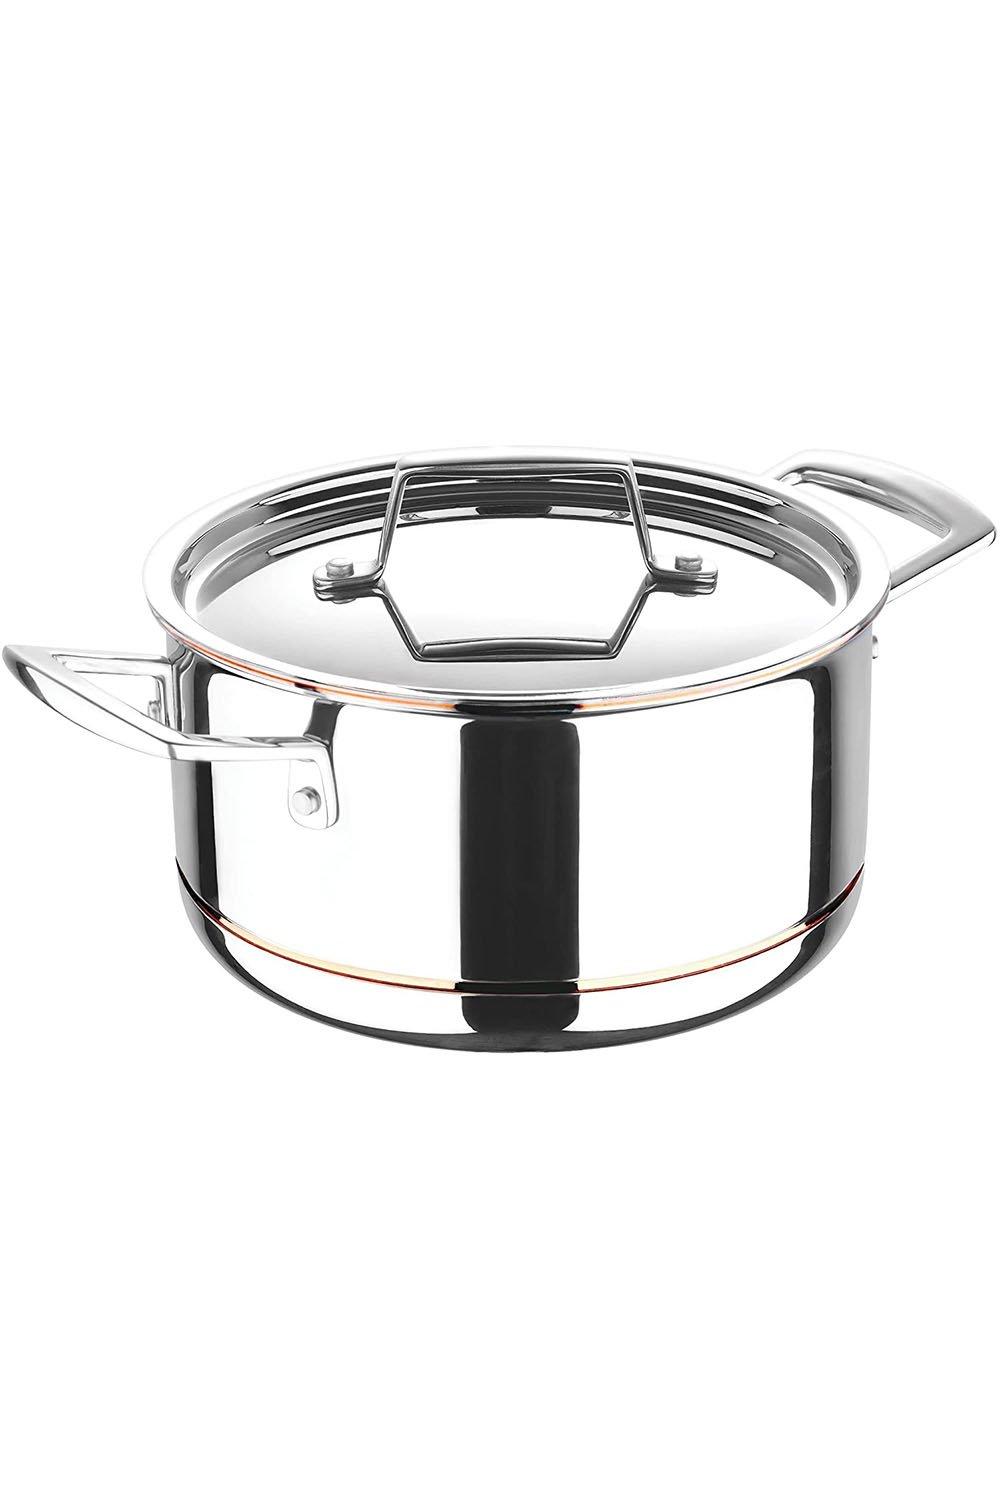 Argent 5CX Stainless Steel Stock Pot with Lid 3.3L Silver